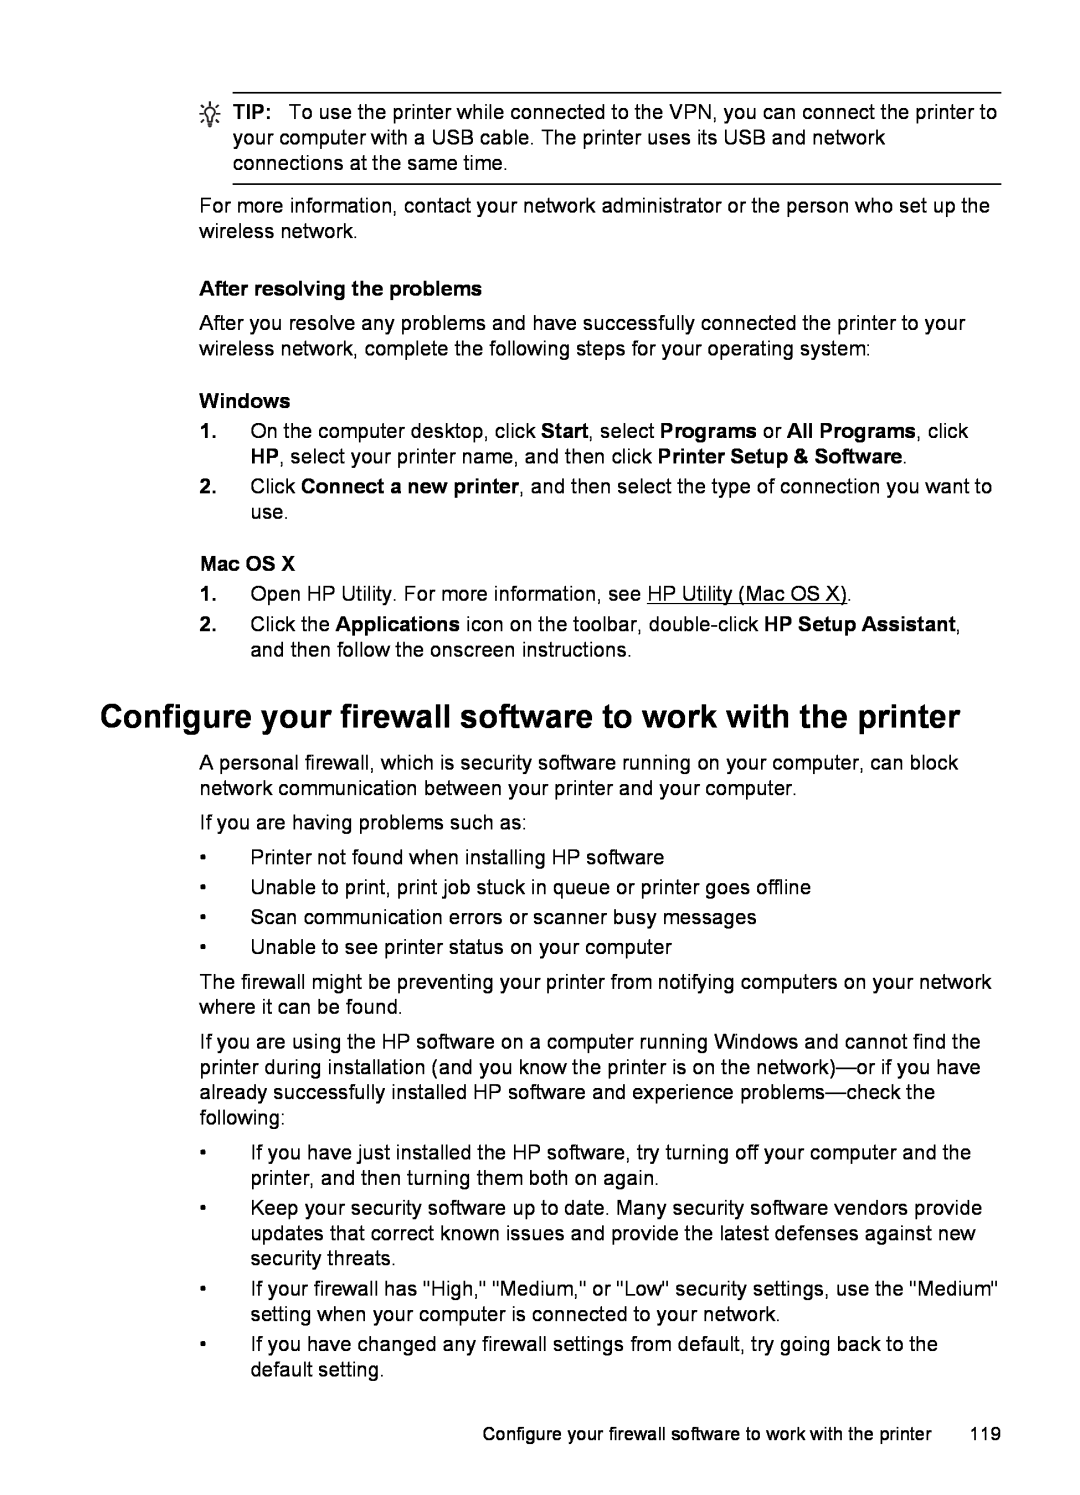 HP 6600 - H7 Configure your firewall software to work with the printer, After resolving the problems, Windows, Mac OS 